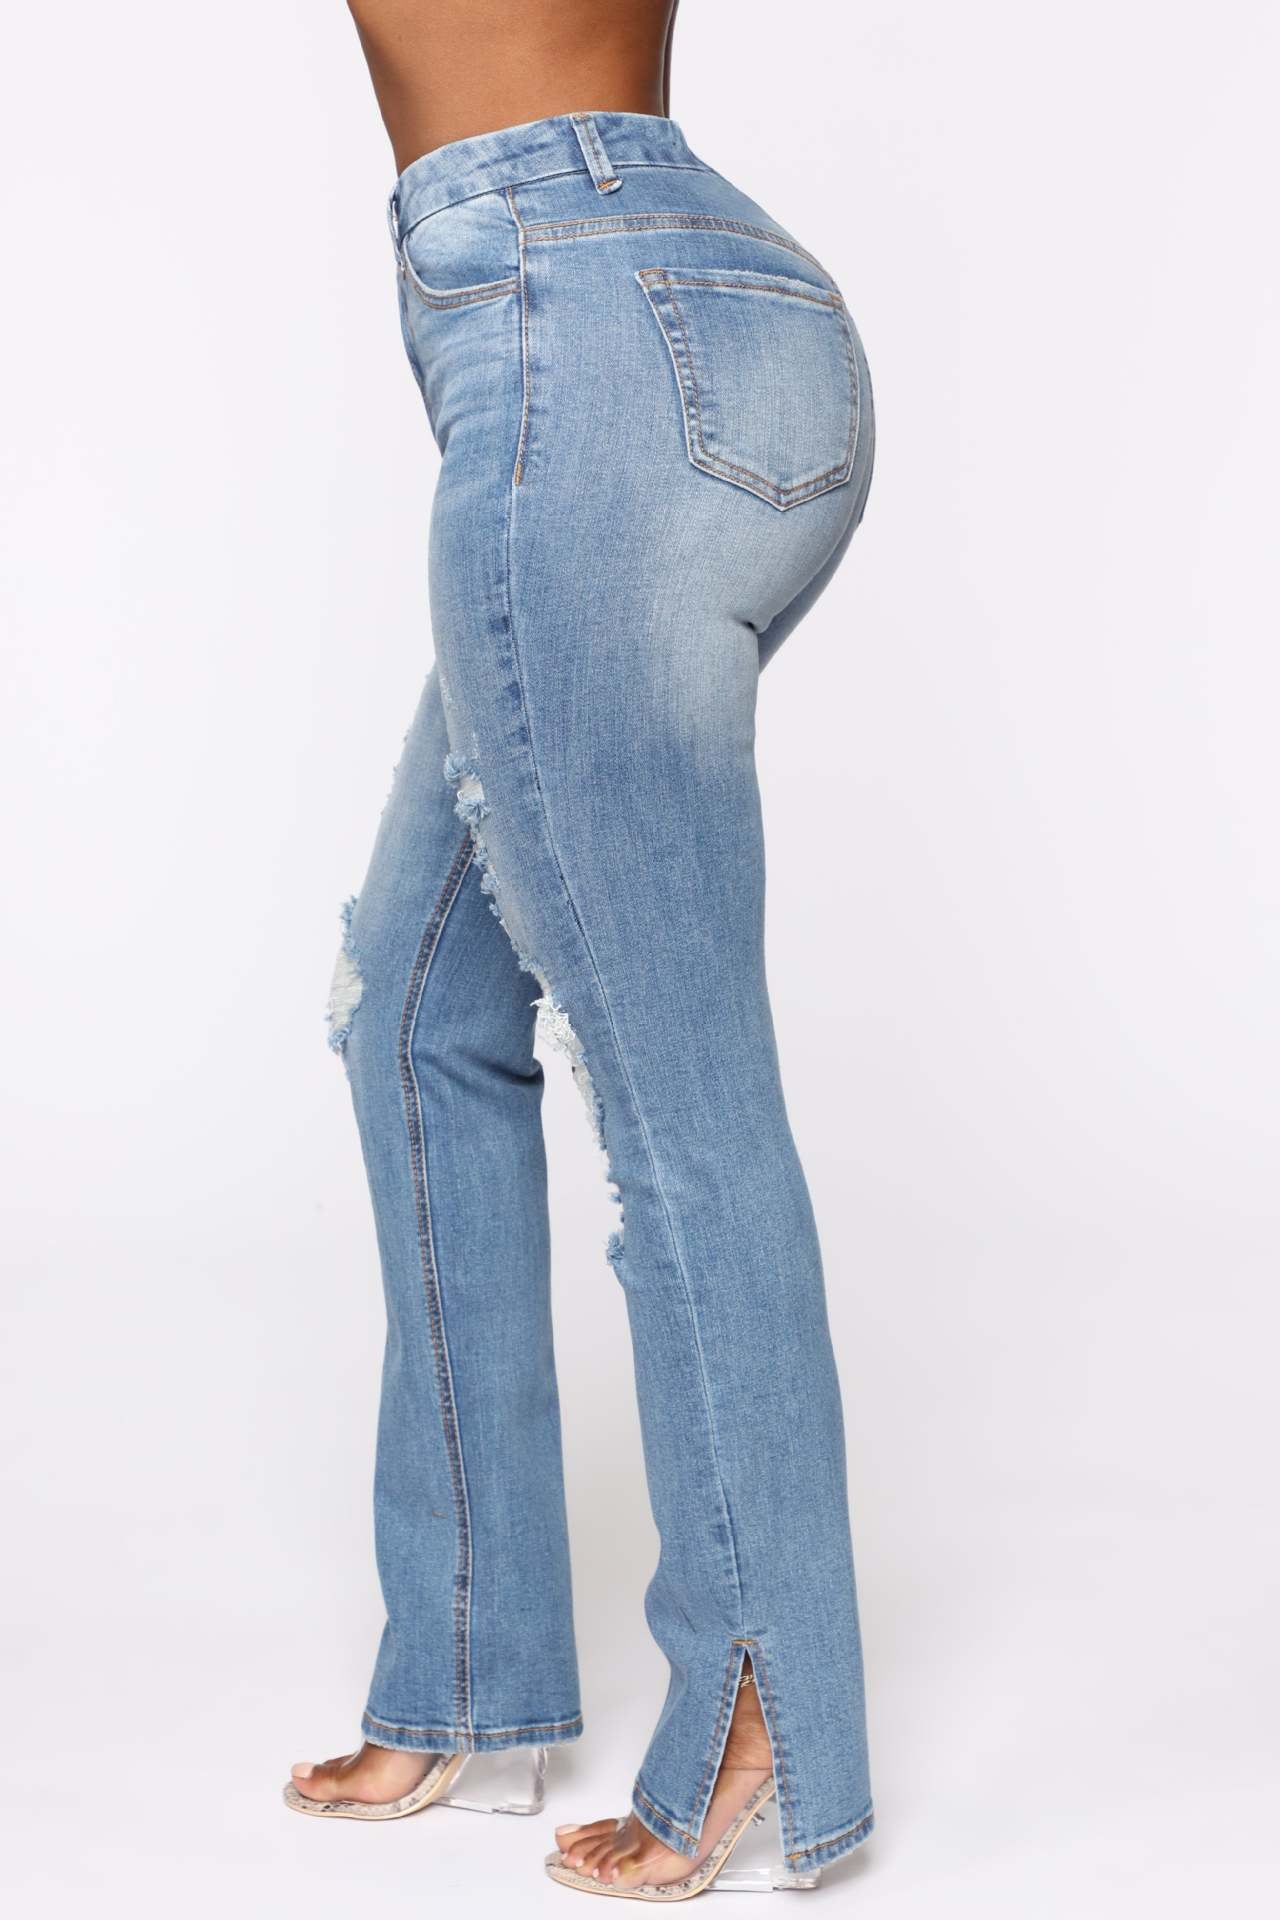  Blue Water Washed Hole High Waist Jeans